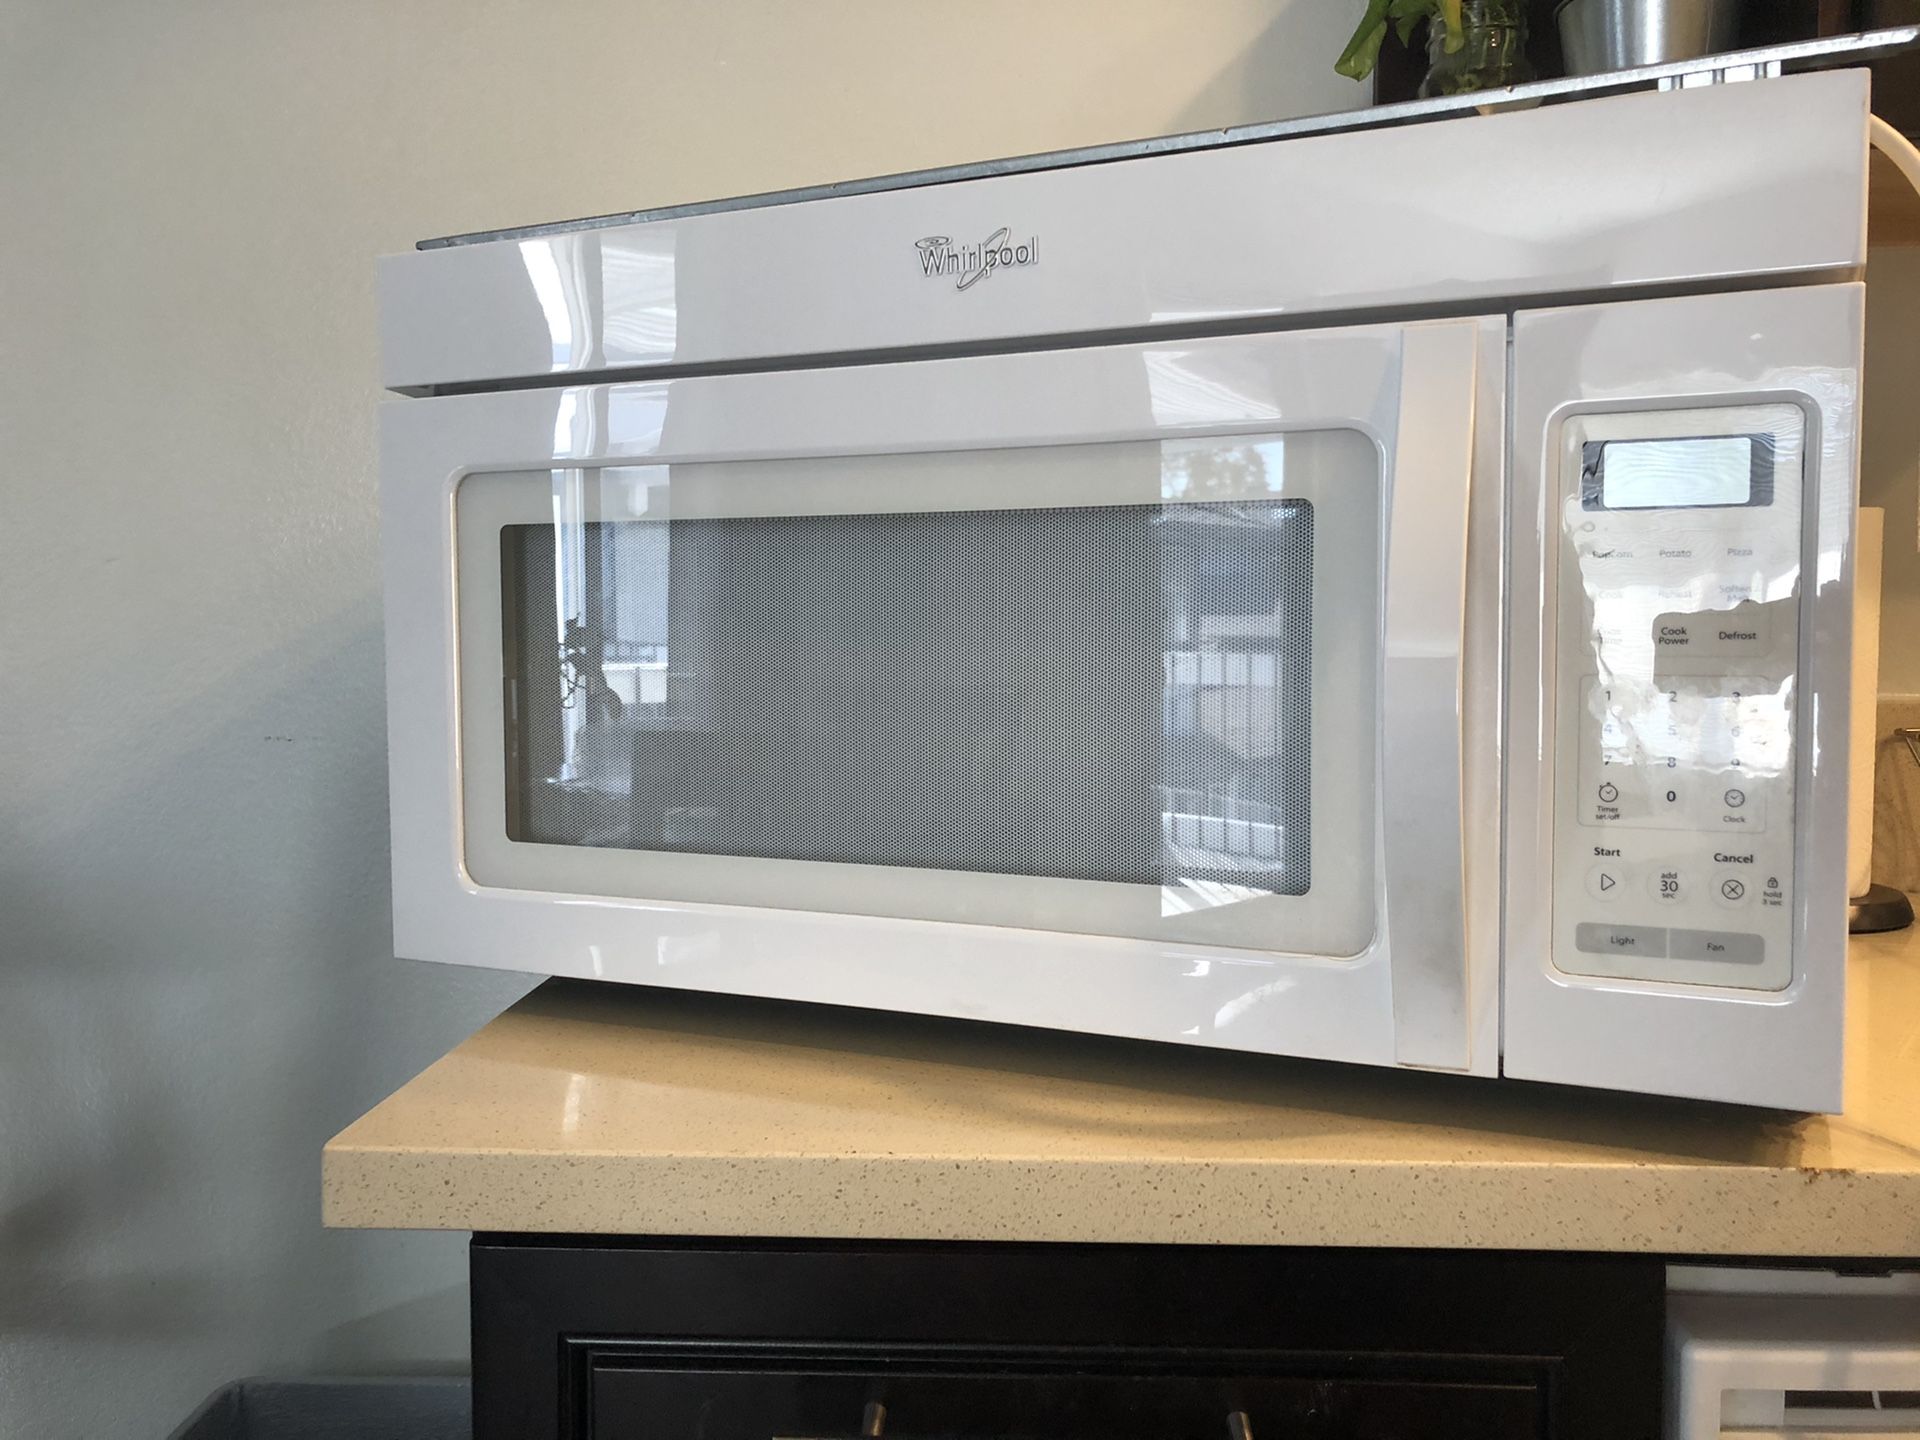 Whirlpool Microwave with Vent